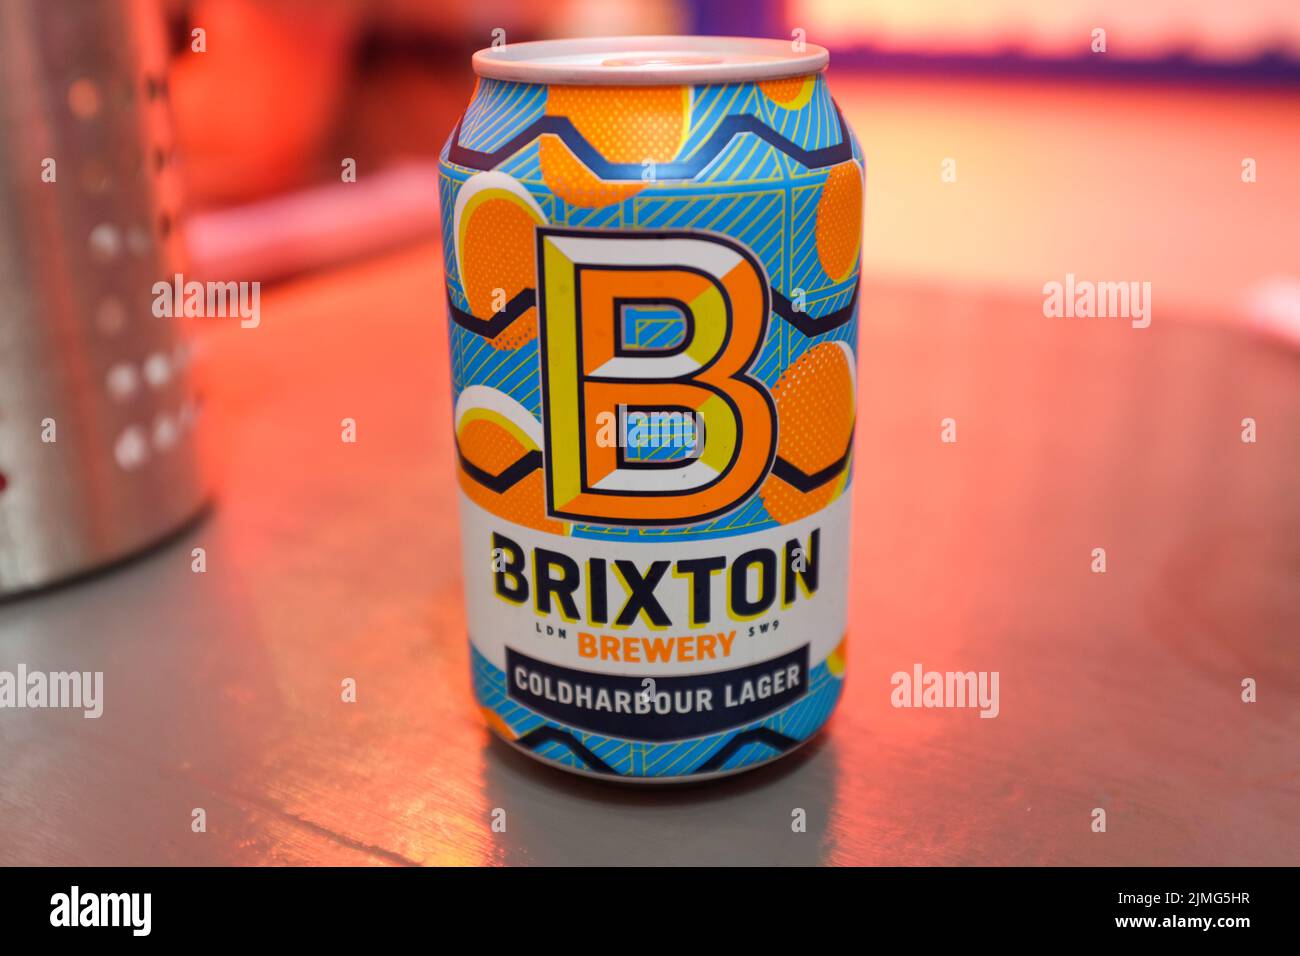 A can of Coldharbour Lager from Brixton Brewery in London, England. Stock Photo